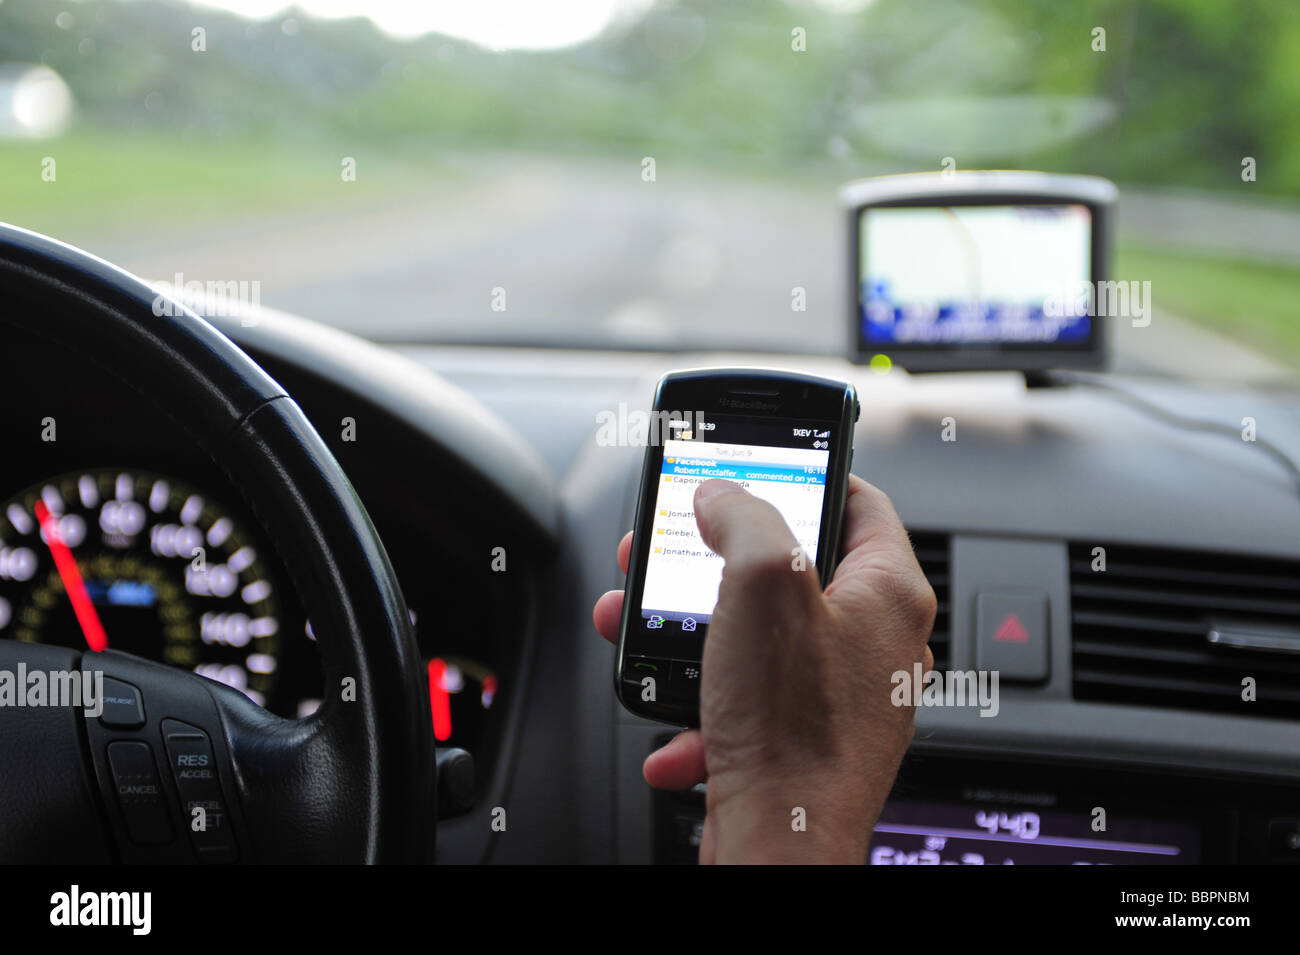 Man using a blackberry cell phone to check email while drive his car Stock Photo